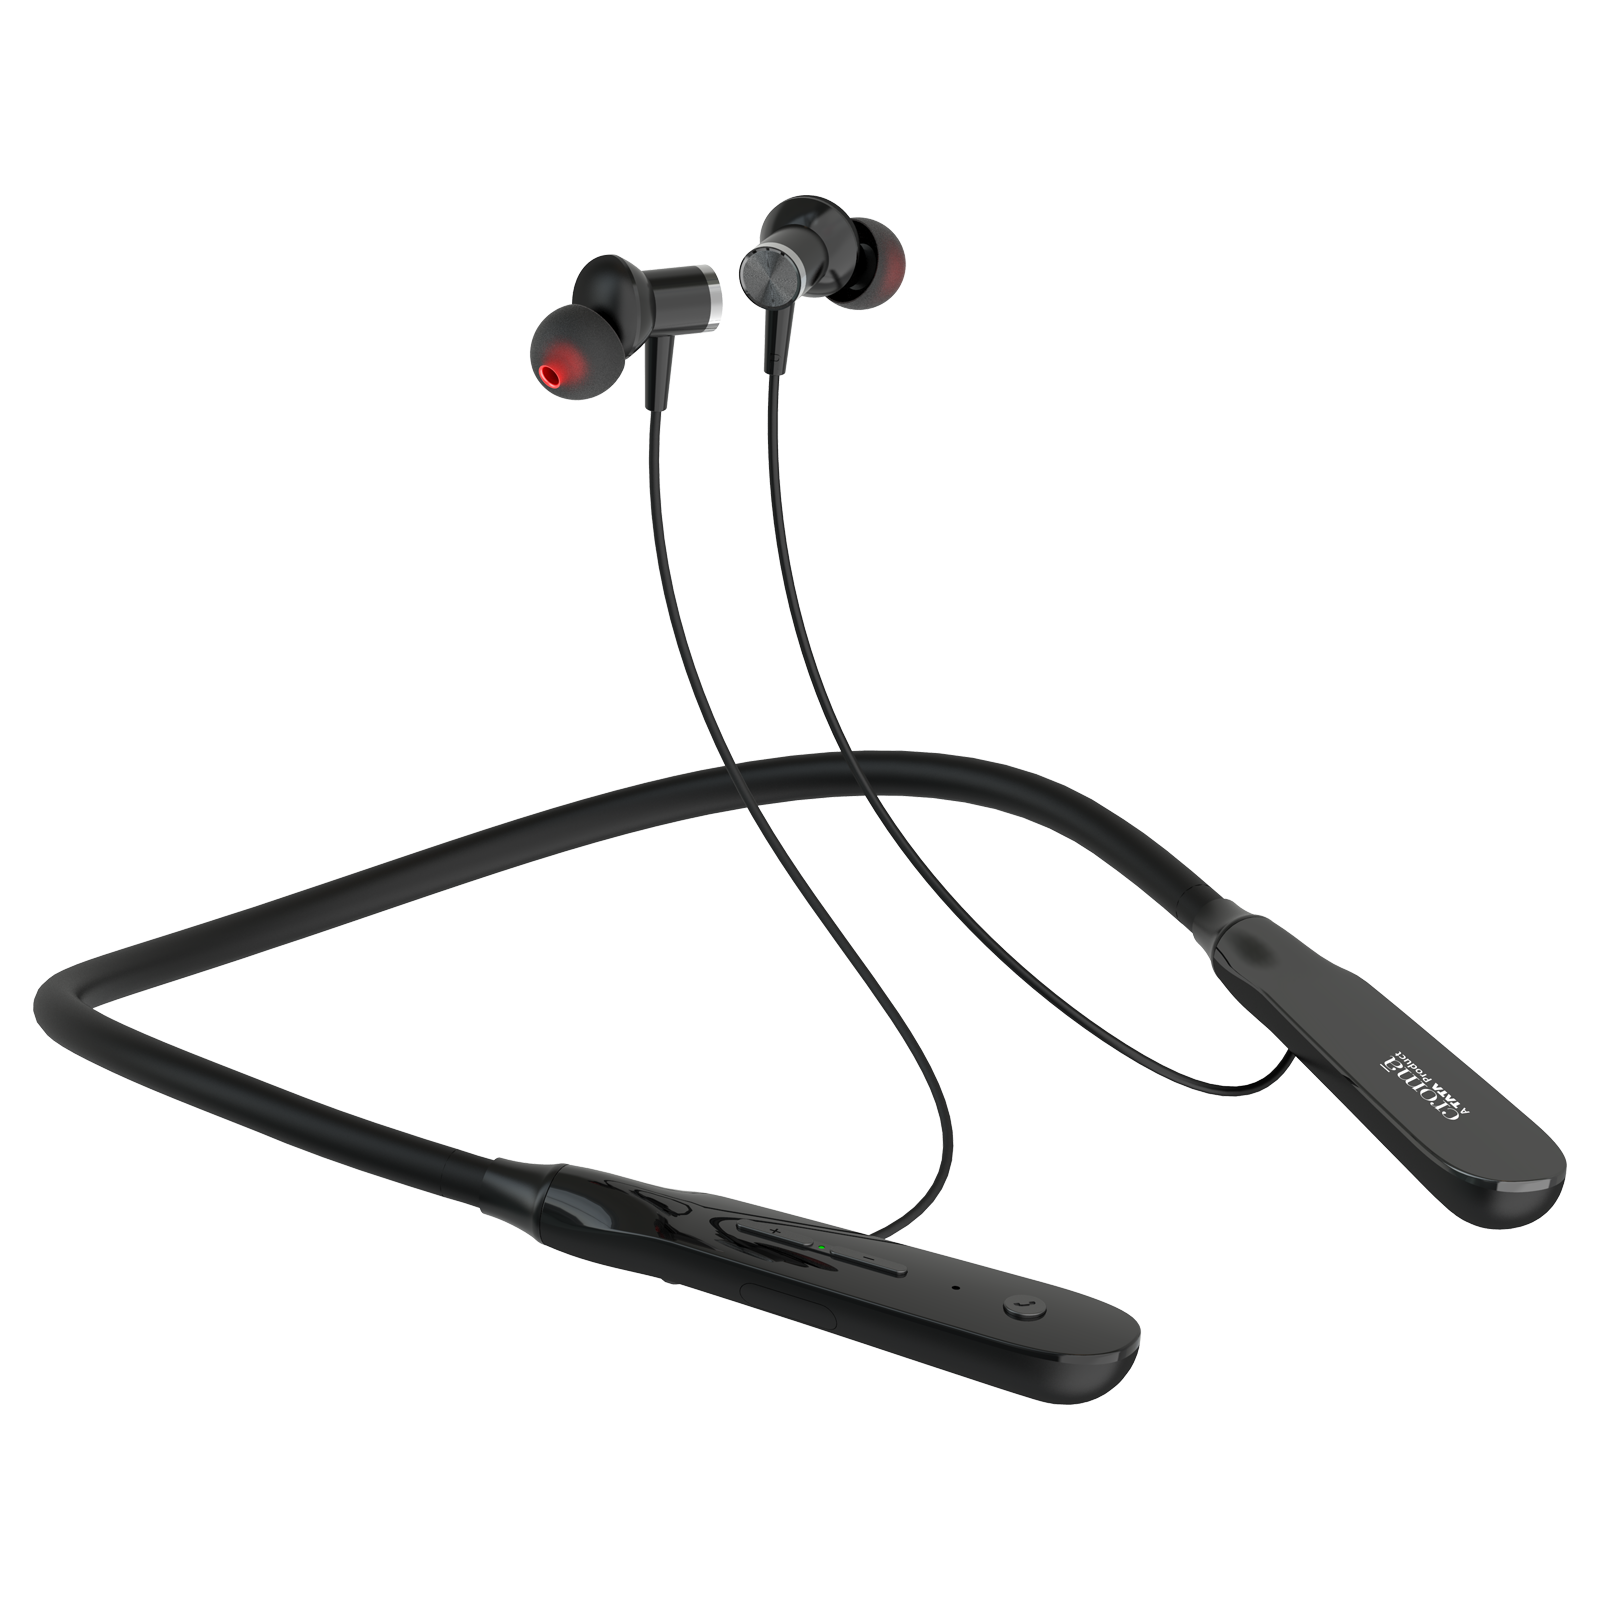 Croma CRSE020EPA0302 Neckband with Environmental Noise Cancellation (IPX4 Water Resistant, 10mm Driver, Black)